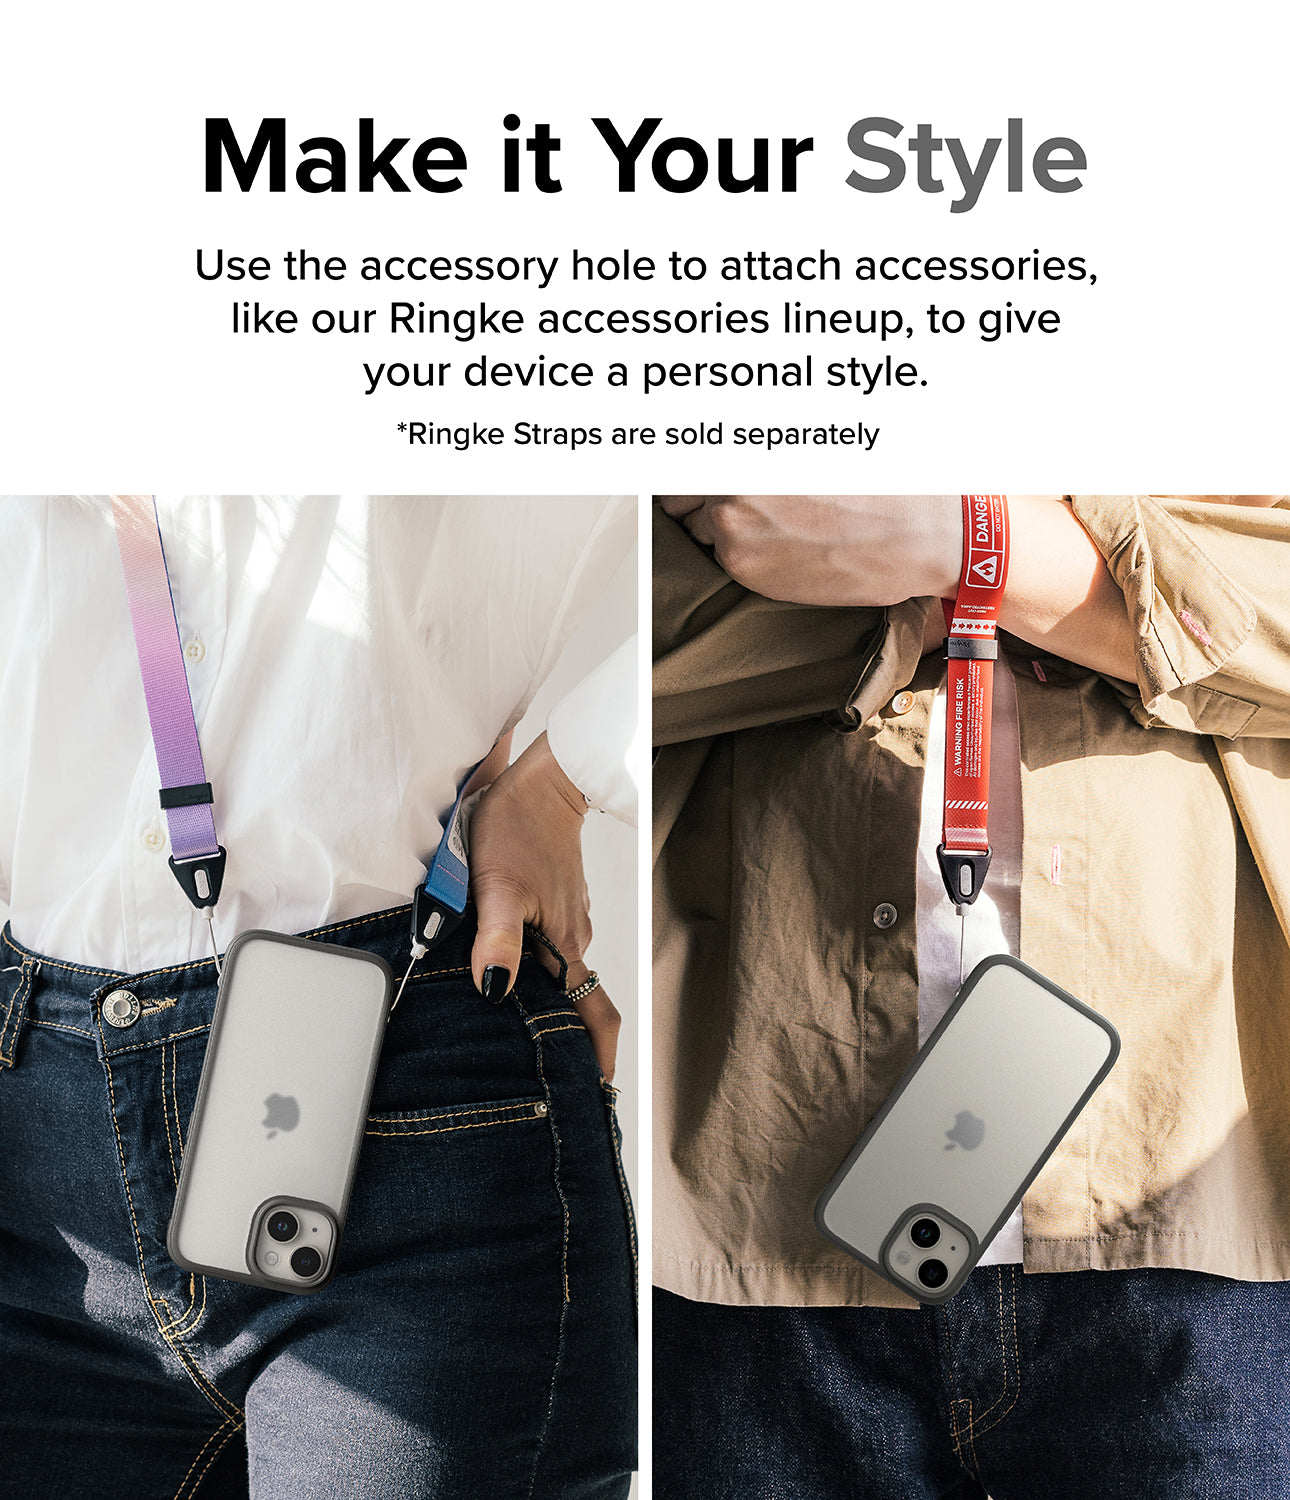 iPhone 15 Case | Fusion Bold Matte/Gray - Make it Your Style. Use the accessory hole to attach accessories, like our Ringke accessories lineup, to give your device a personal style.